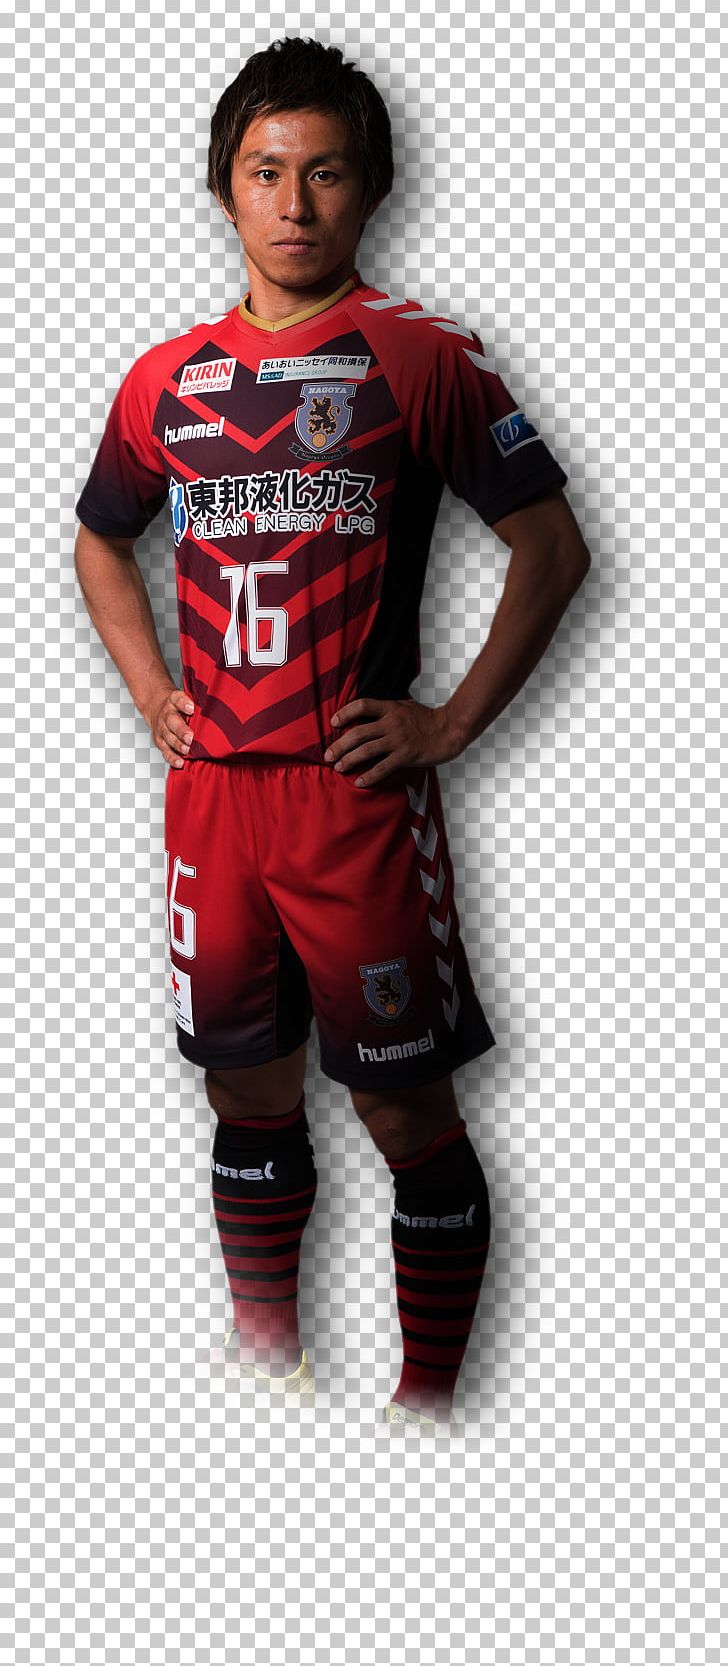 T-shirt Team Sport Shoulder Protective Gear In Sports PNG, Clipart, Clothing, Jersey, Joint, Nakamura, Outerwear Free PNG Download